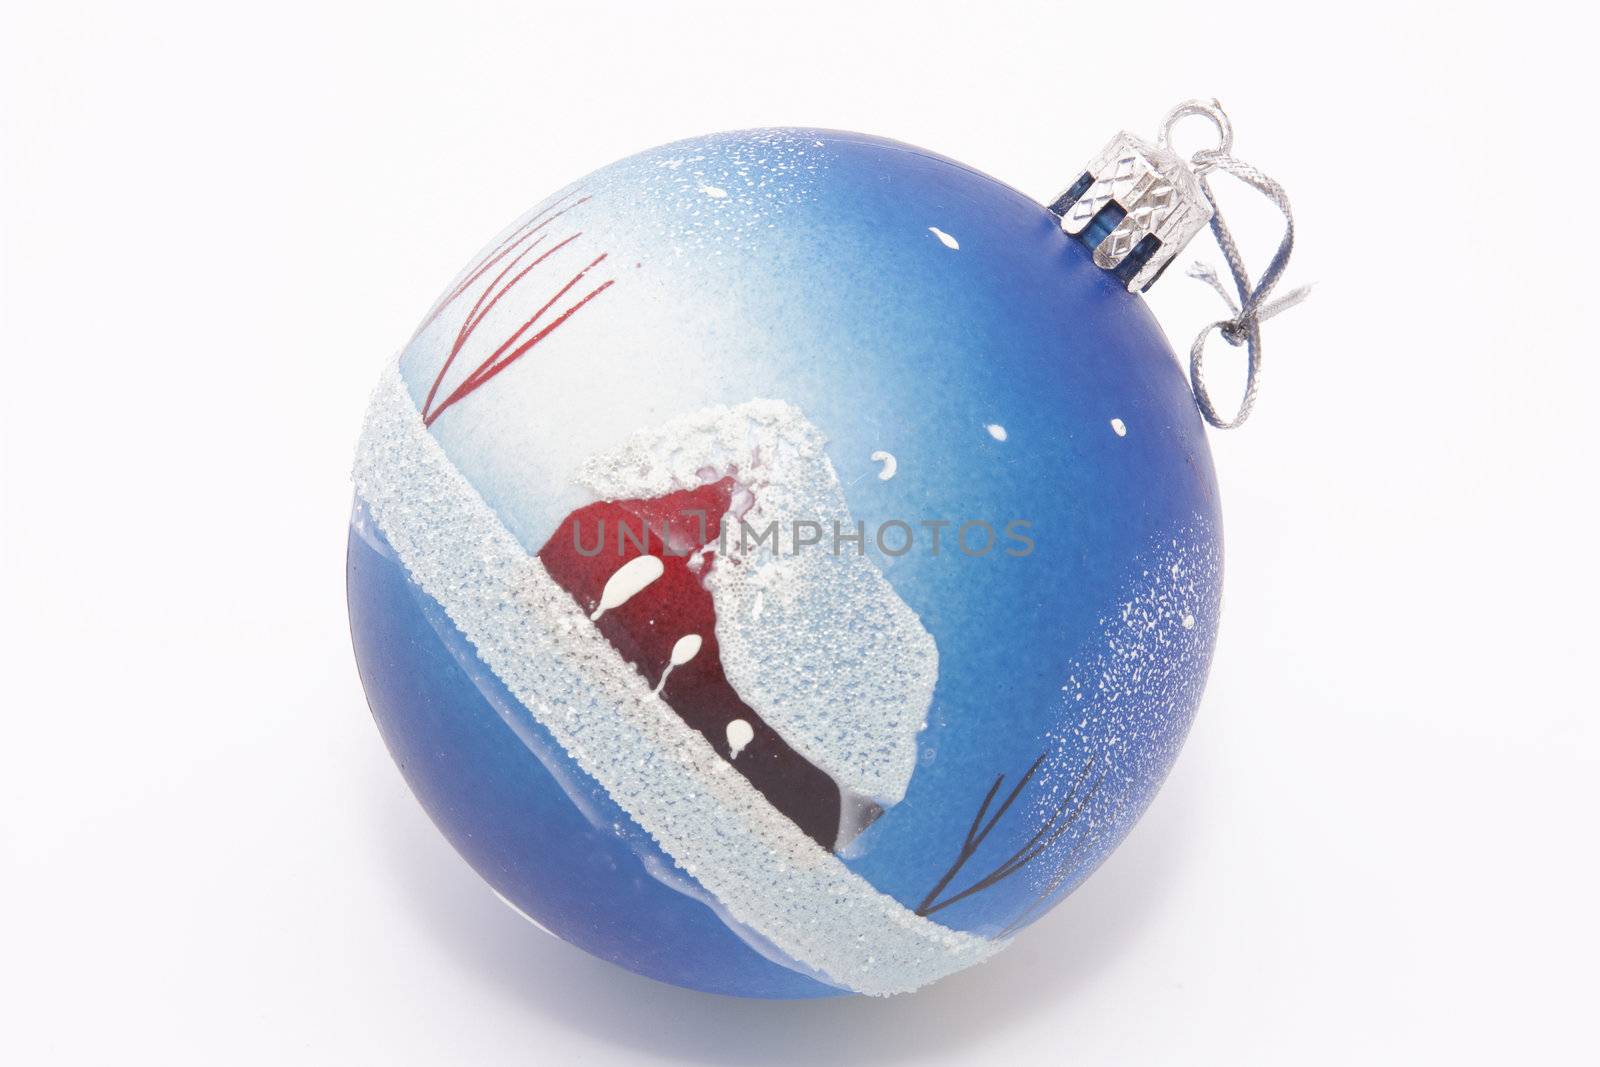 Fur-tree toy - a sphere with house drawing on the white background